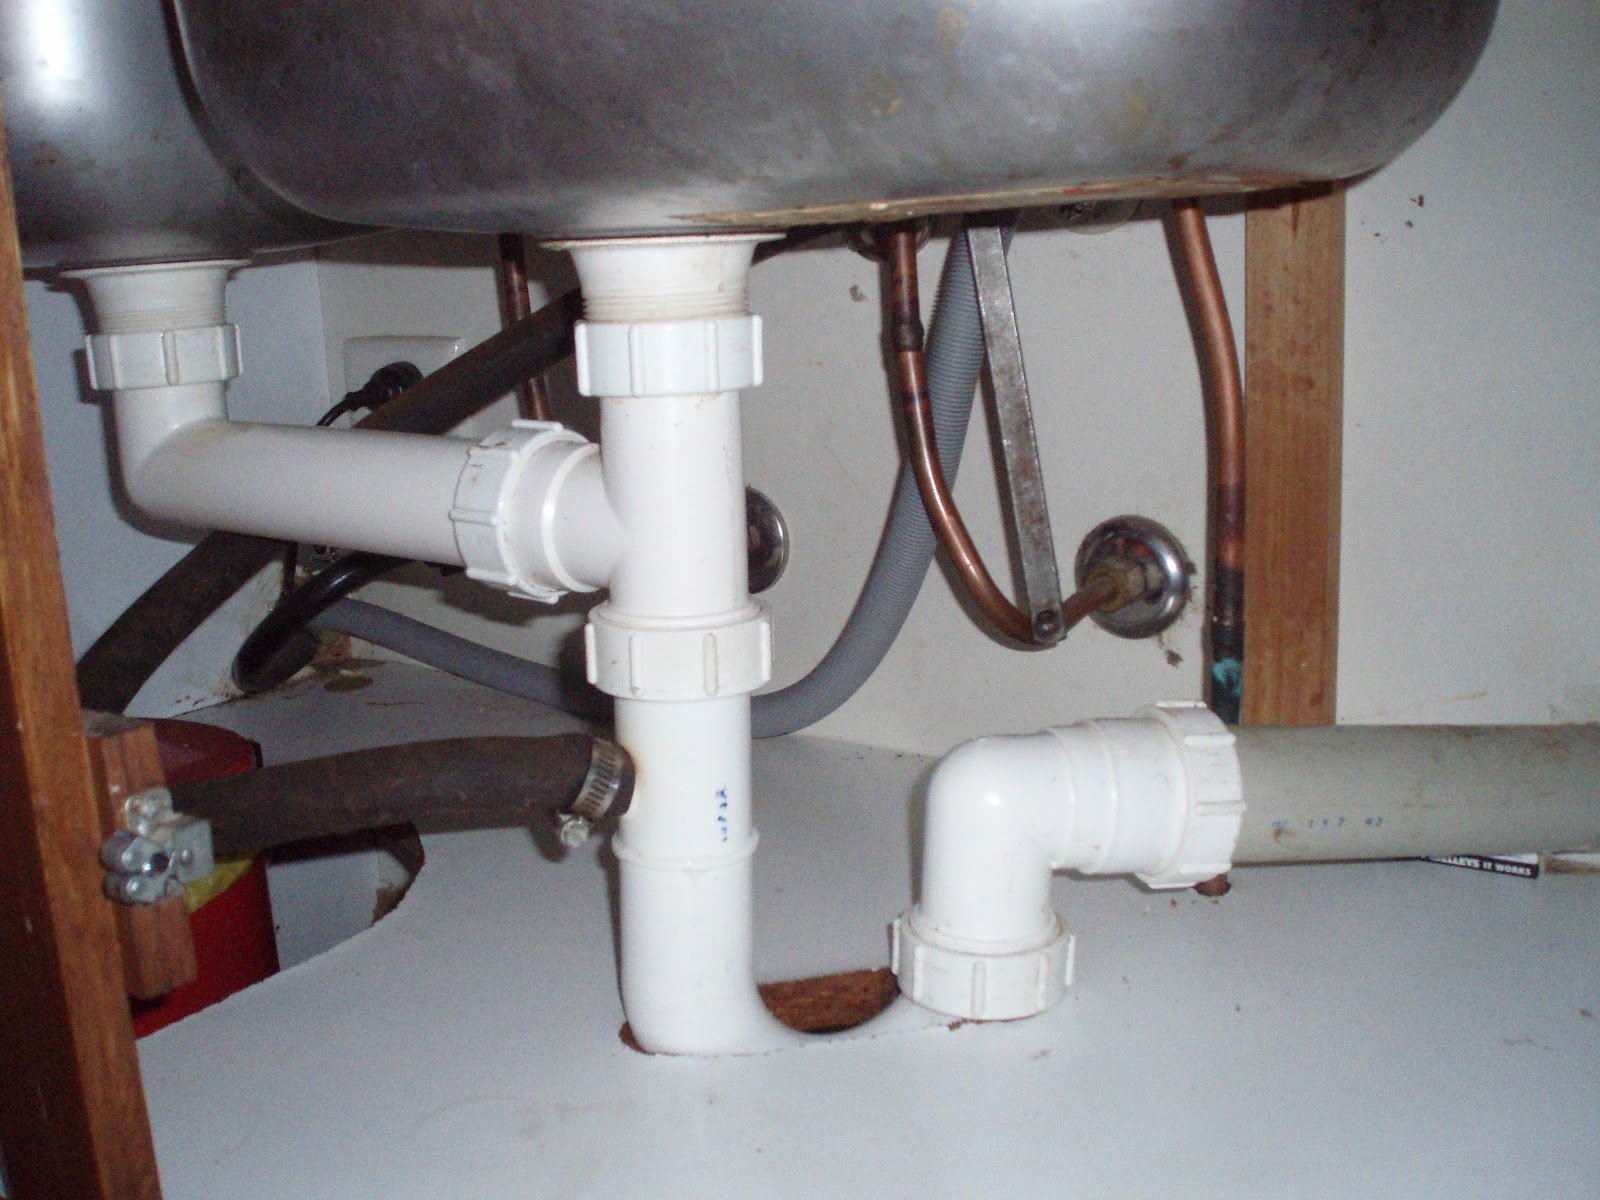 How to fix and clean a leak in a U bend under the sink - LetsFixIt